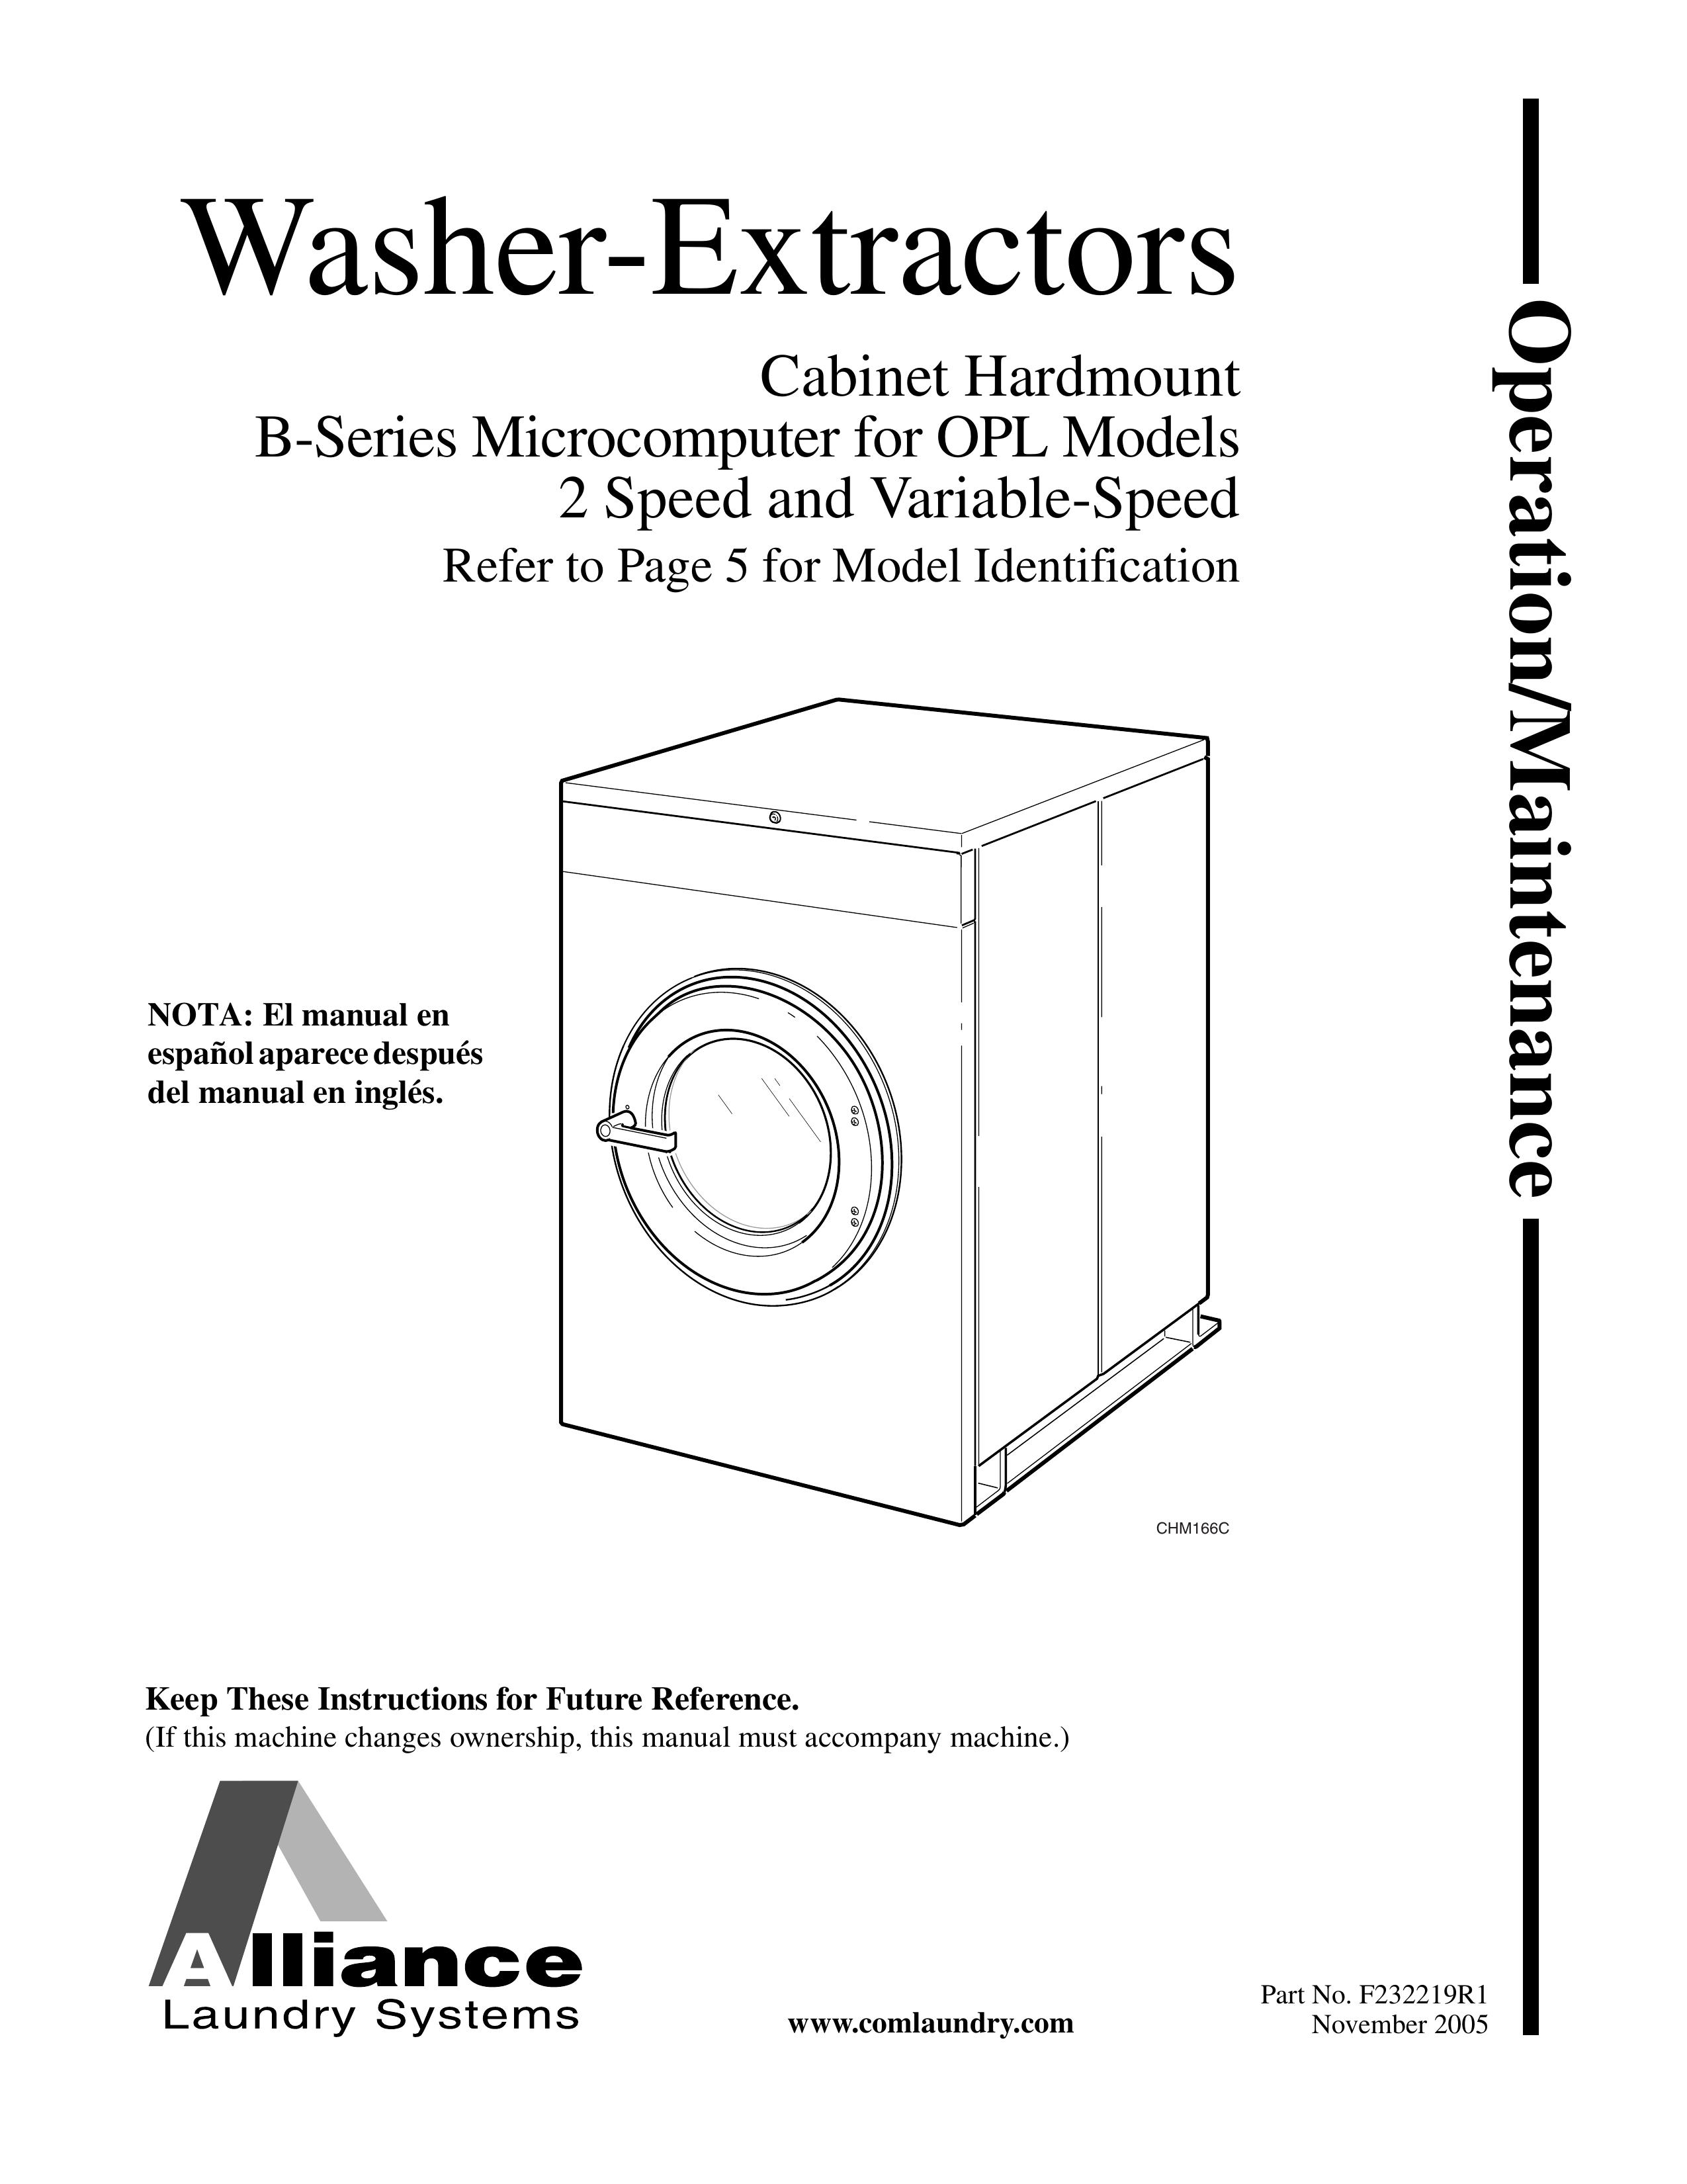 Alliance Laundry Systems B-Series Washer User Manual